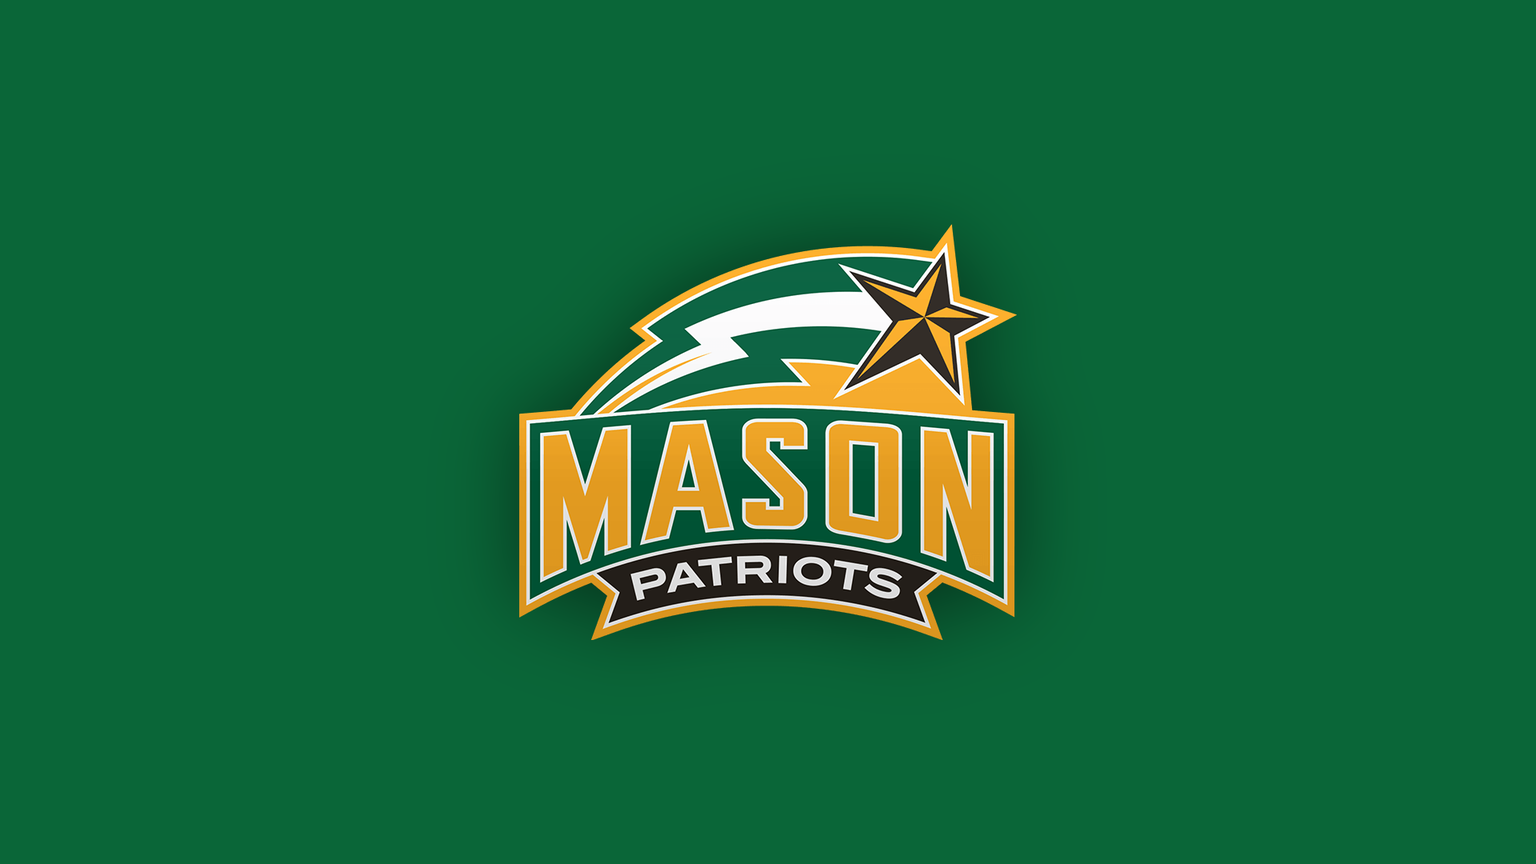 How to Watch The Mason Patriots Live Without Cable in 2023 The